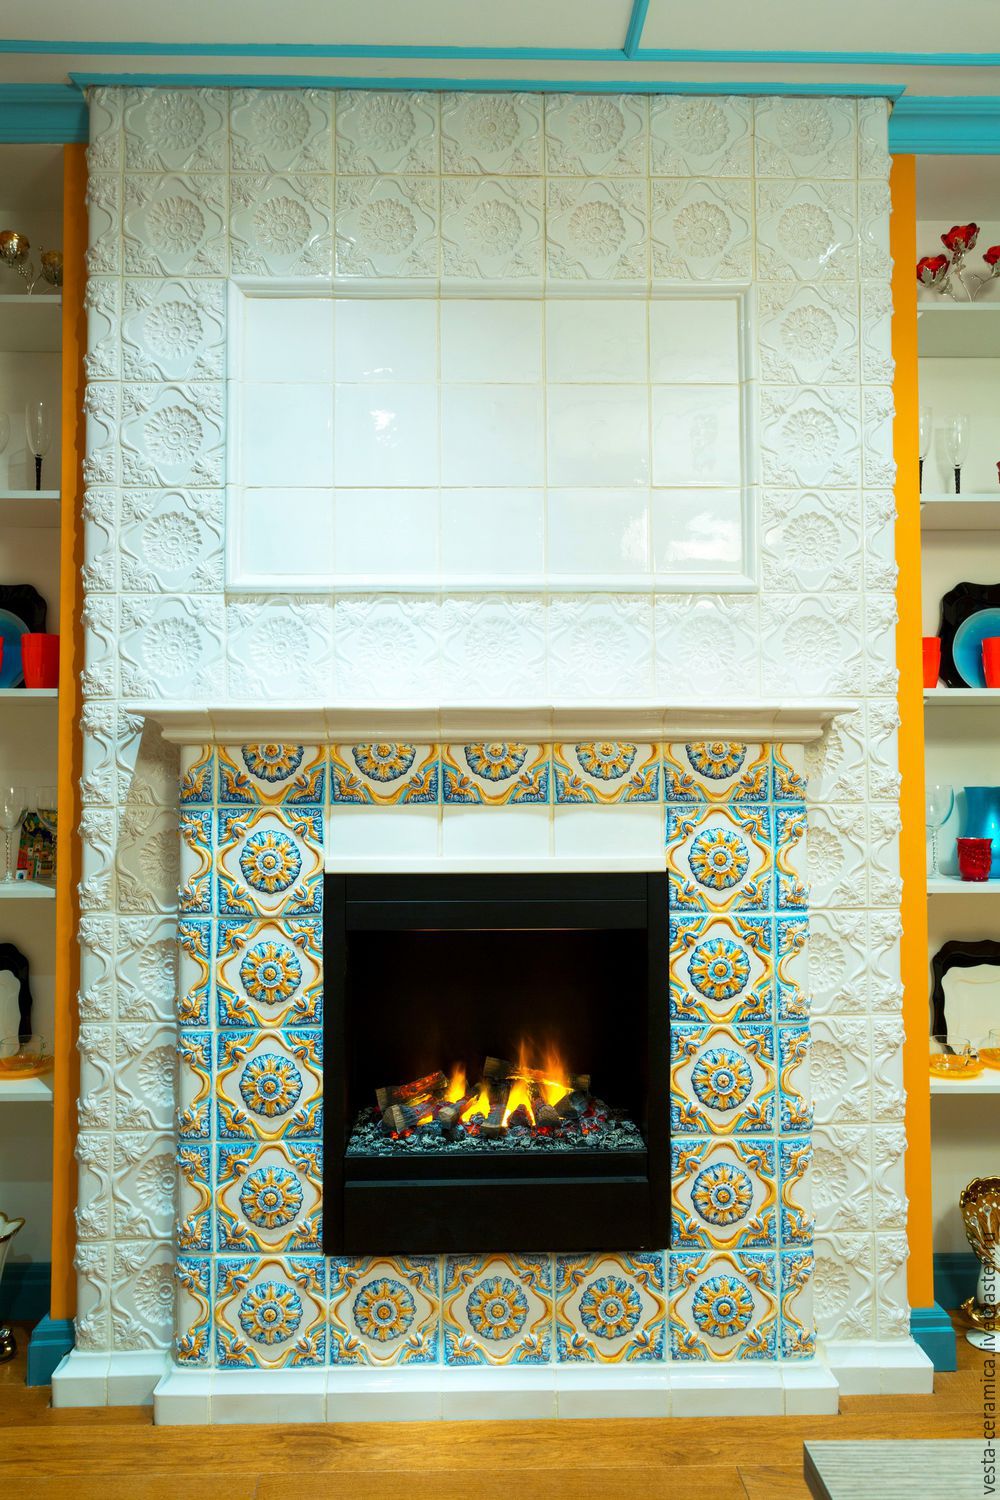 Fireplace with Stockings New Tiled Fireplace